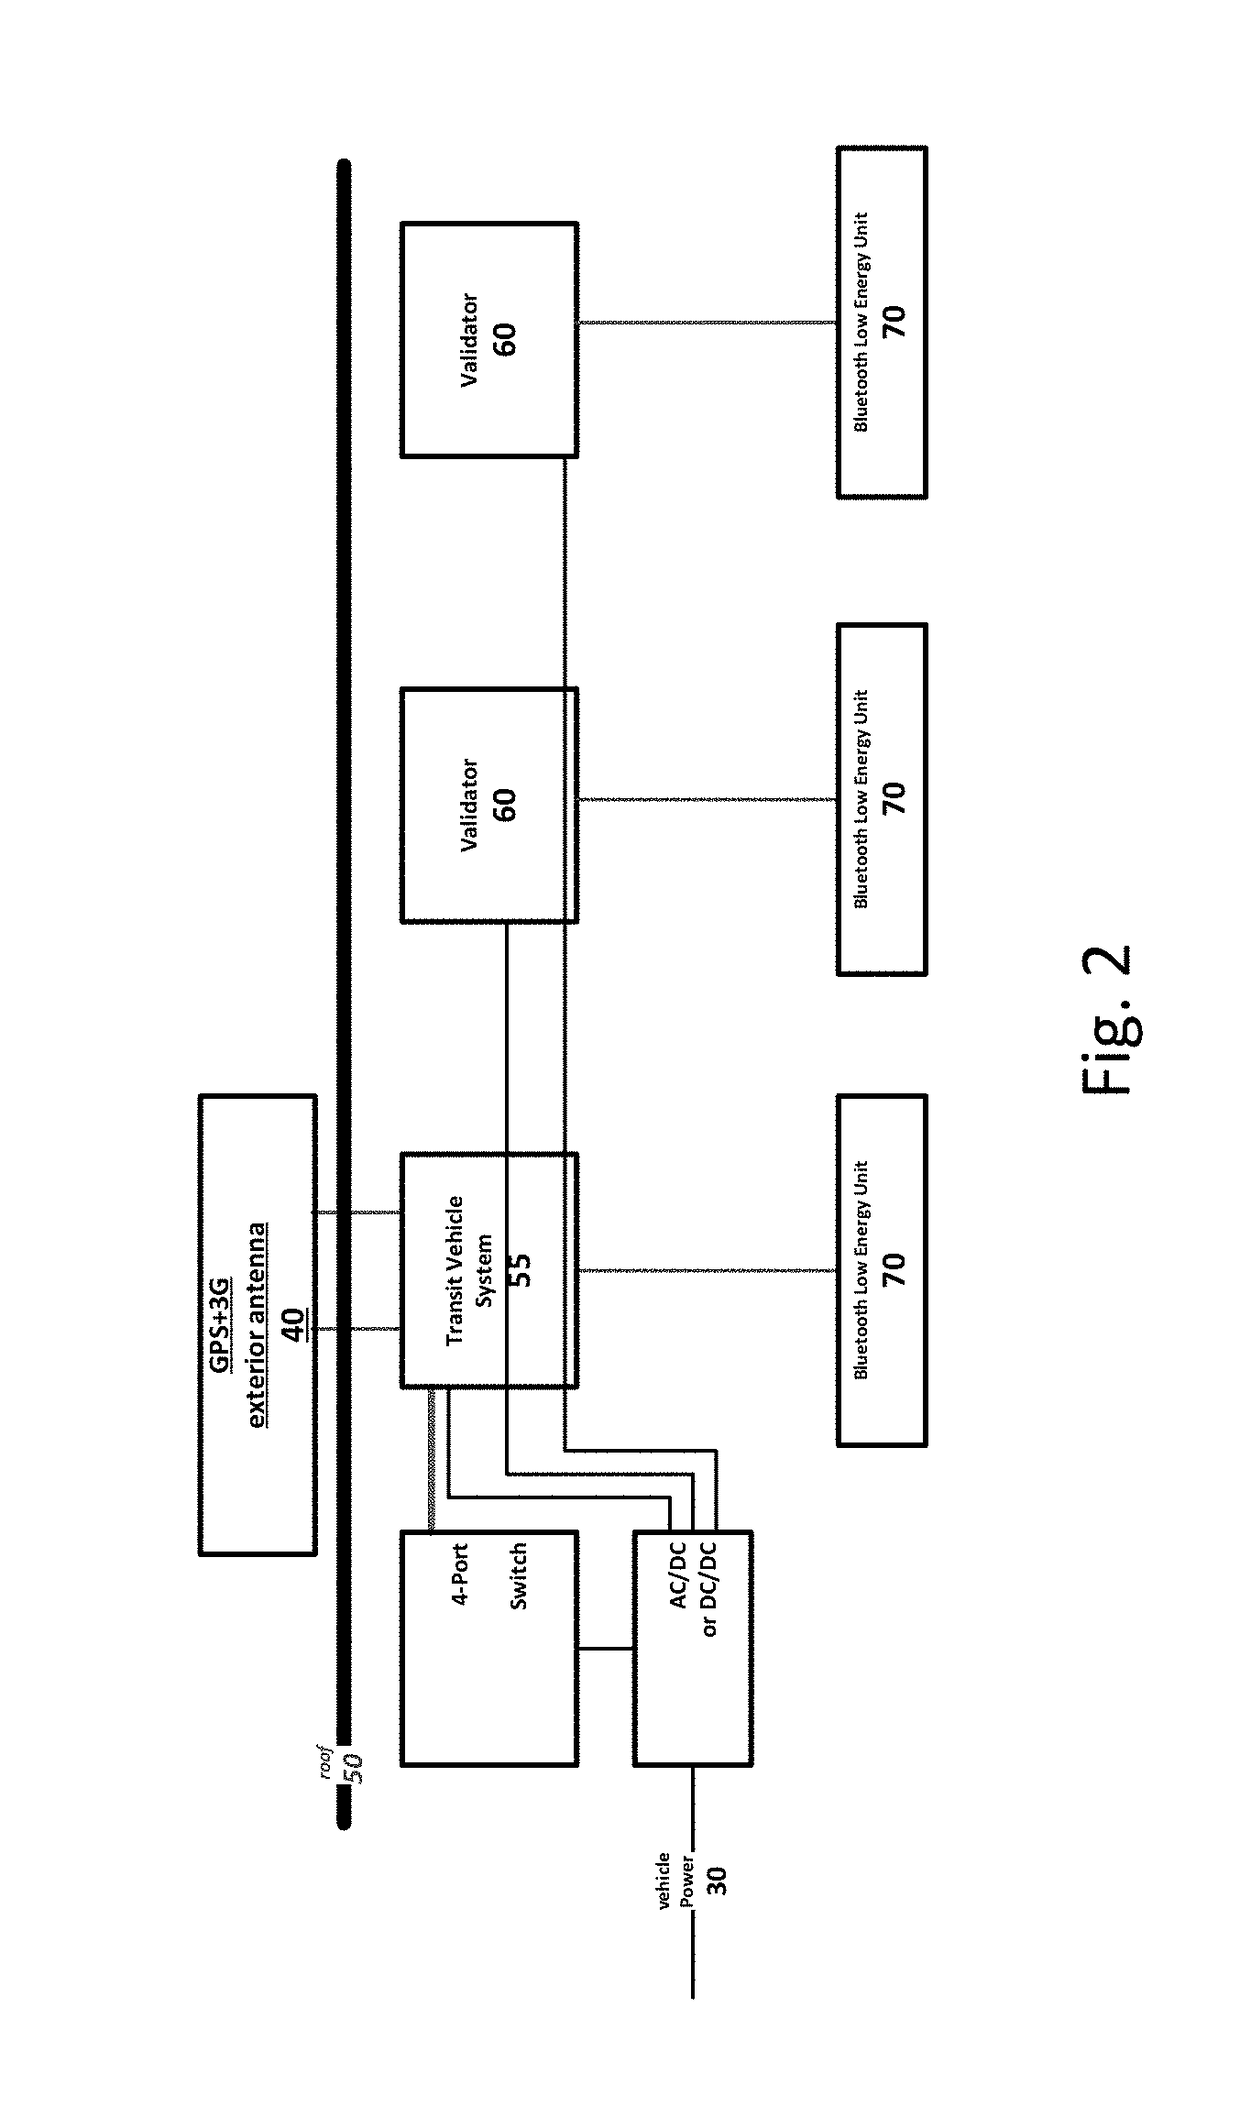 System for automated fare collection and payment validation, particularly for public transit applications